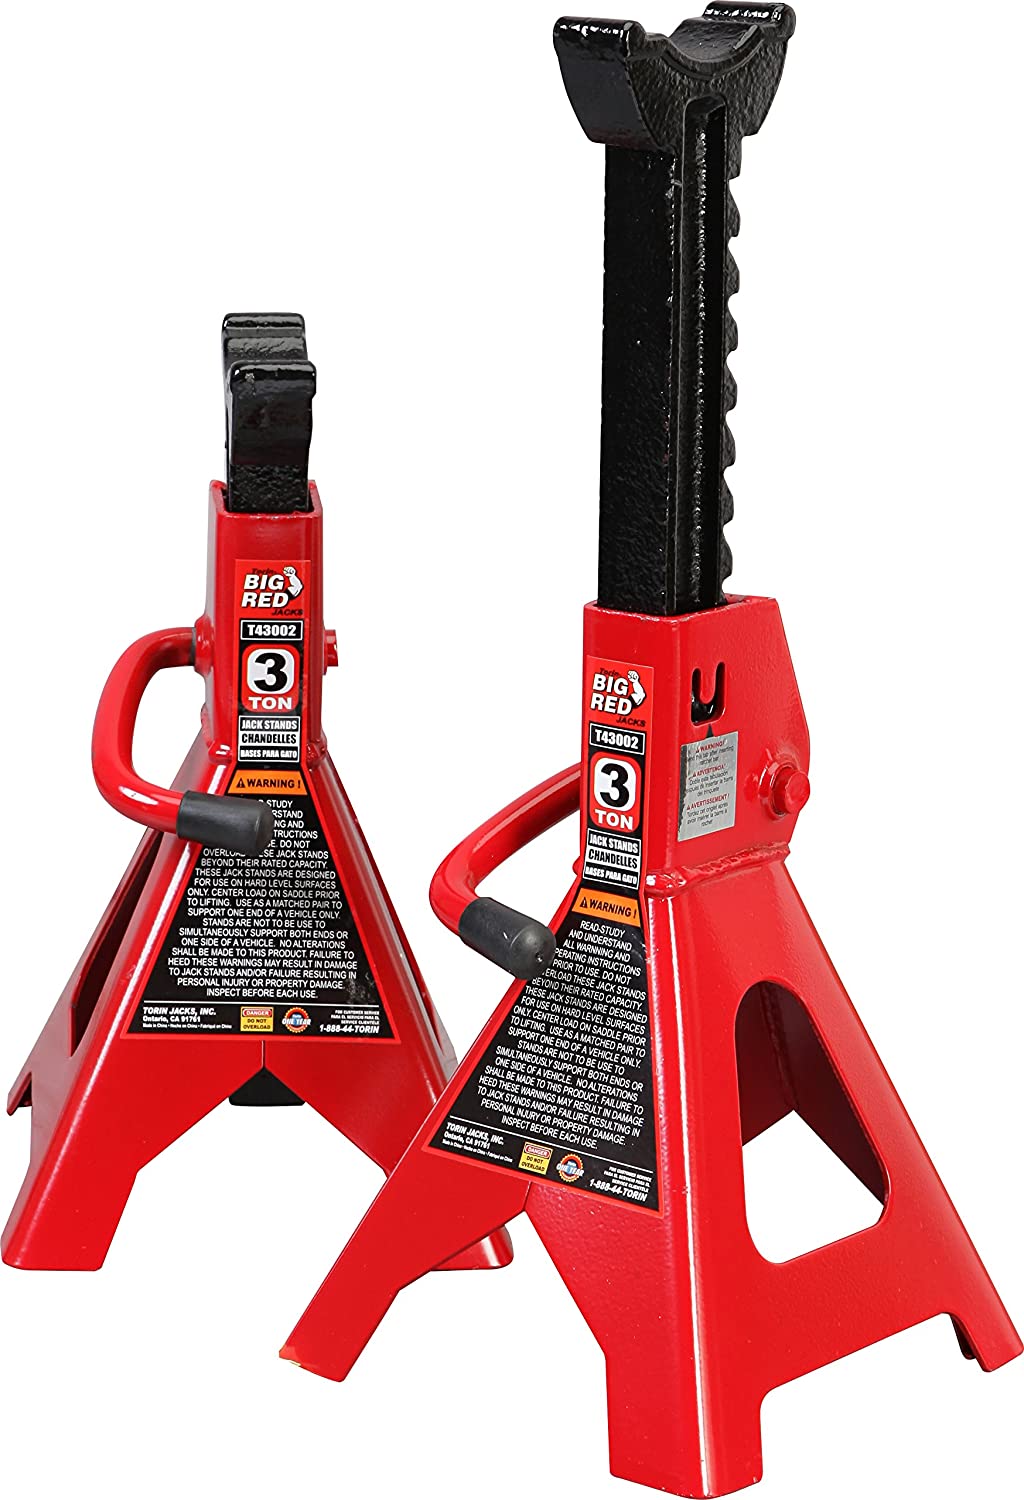 BIG RED T42202 Torin Steel Jack Stands: 2 Ton (4,000 lb) Capacity, Red, 1 Pair (CLEARANCE)